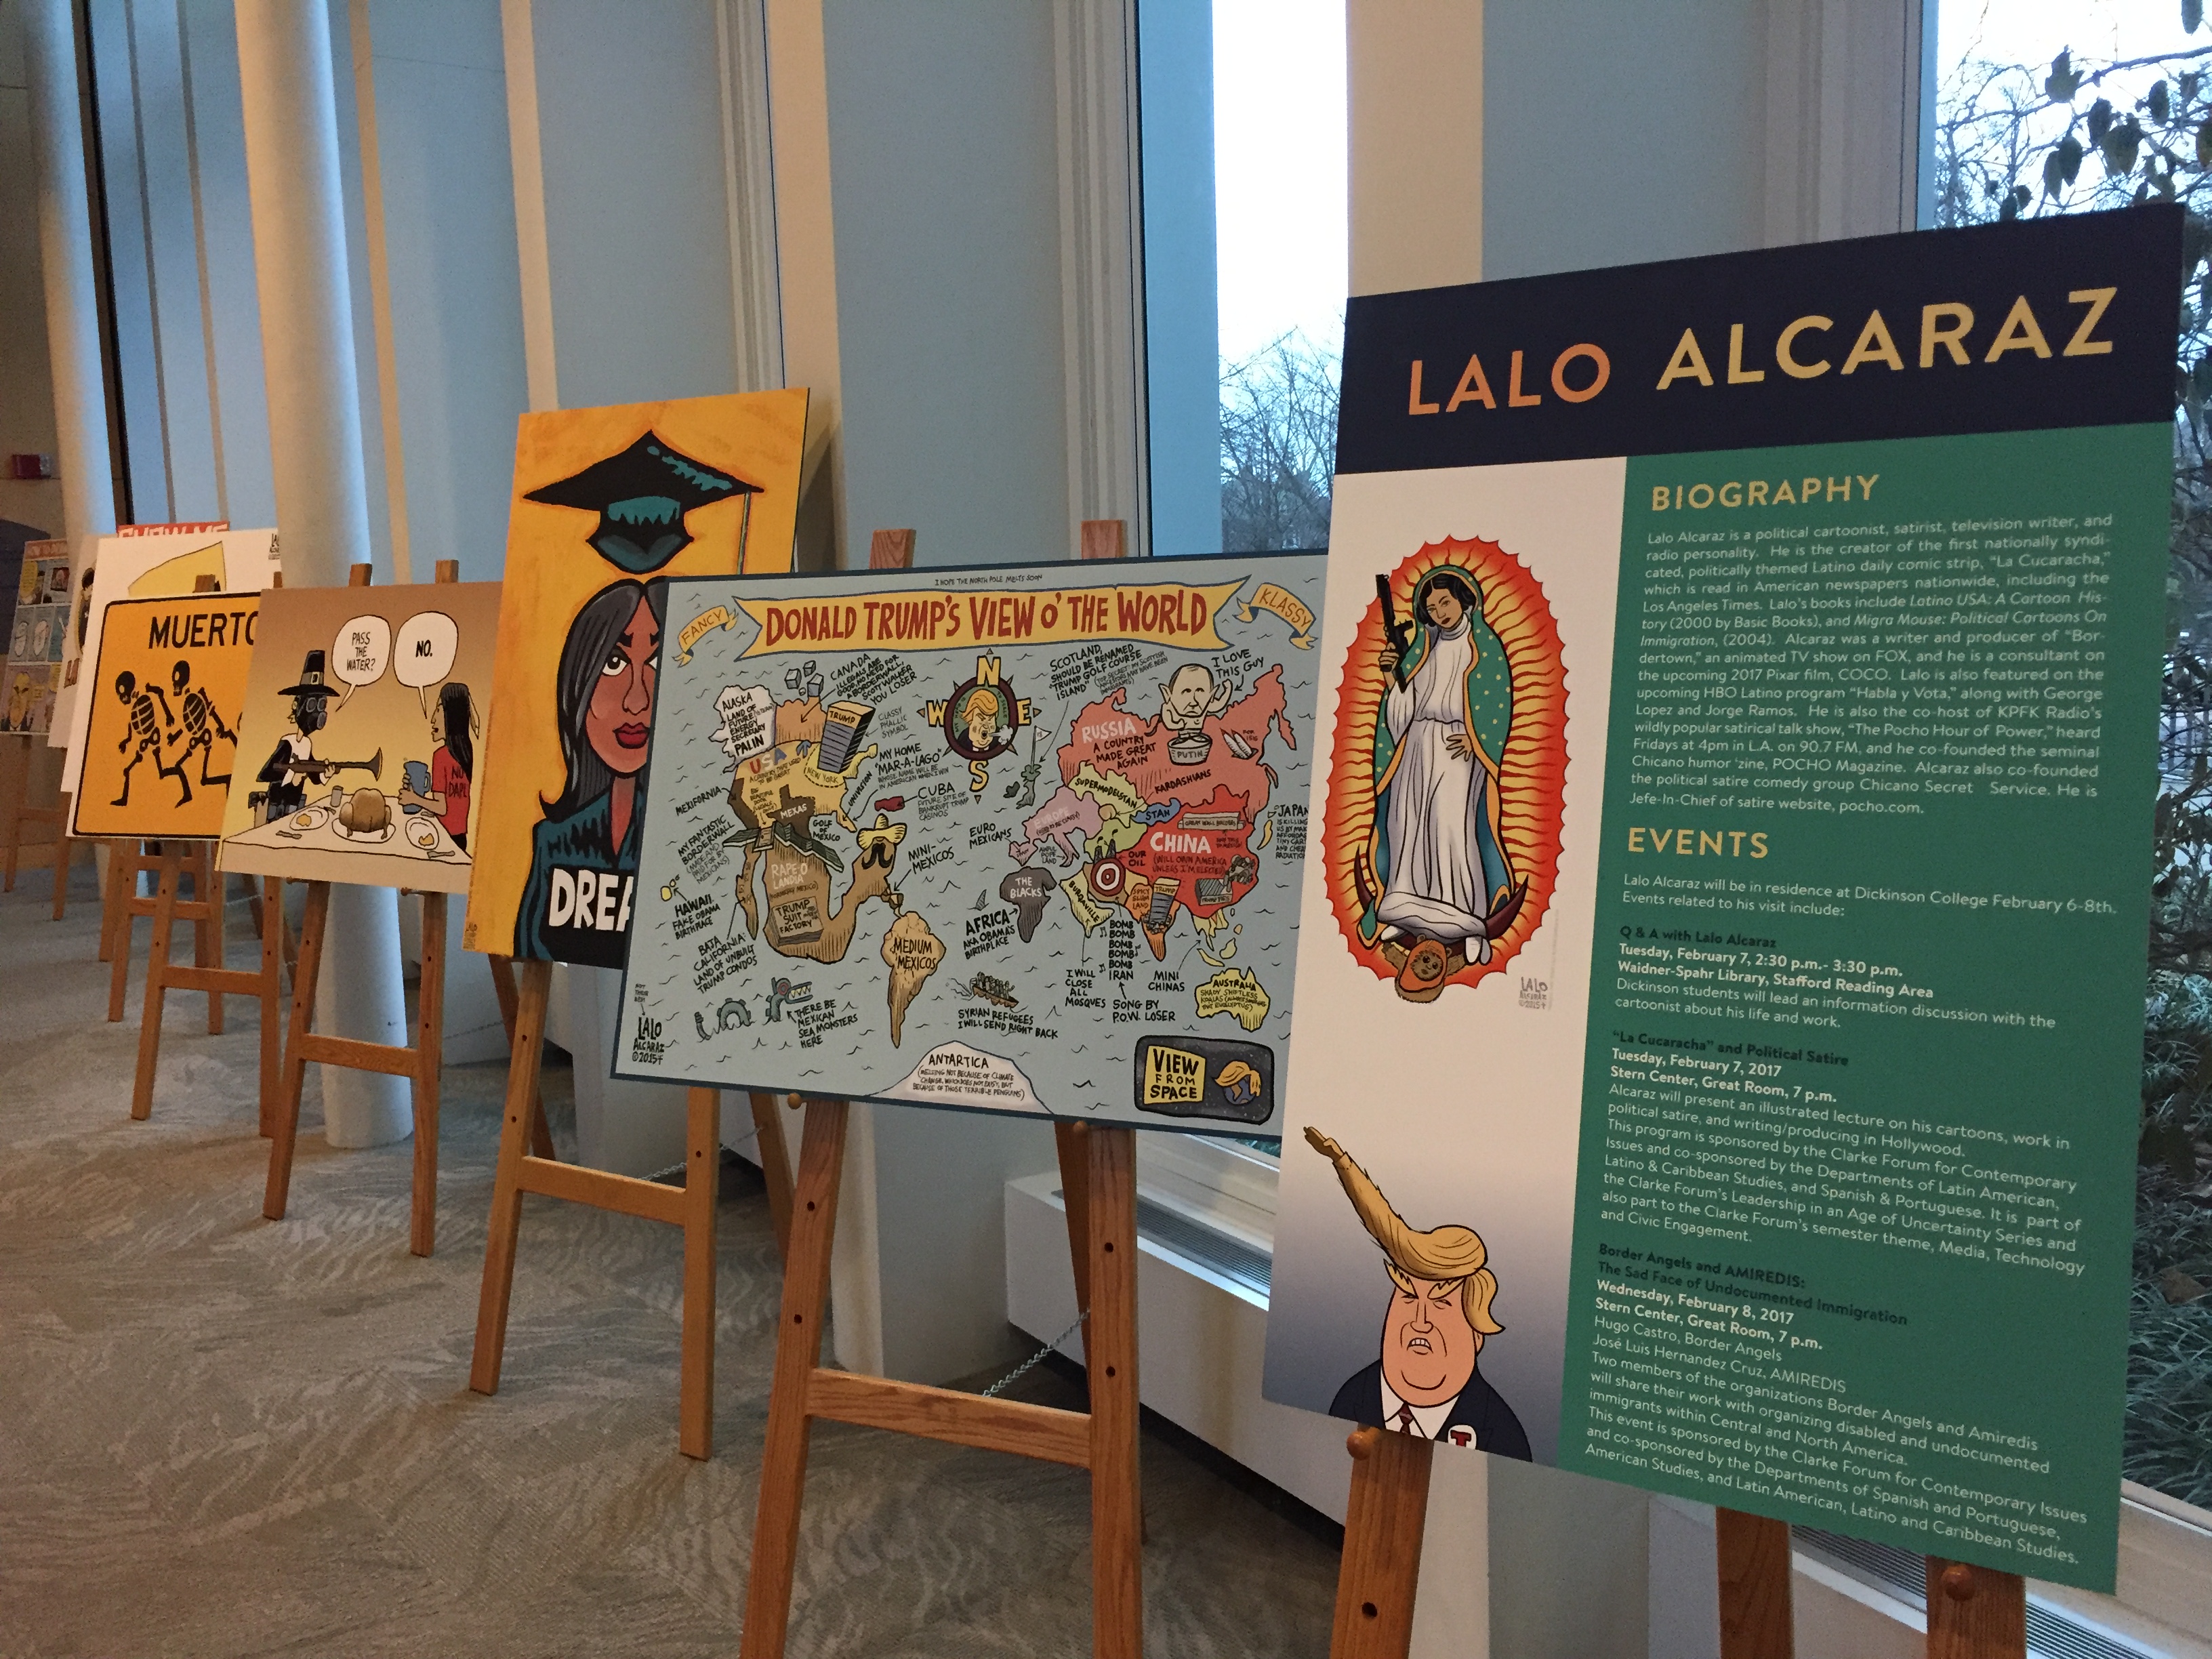 From Satire to Folk Music, the Symbolism Behind 'La Cucaracha